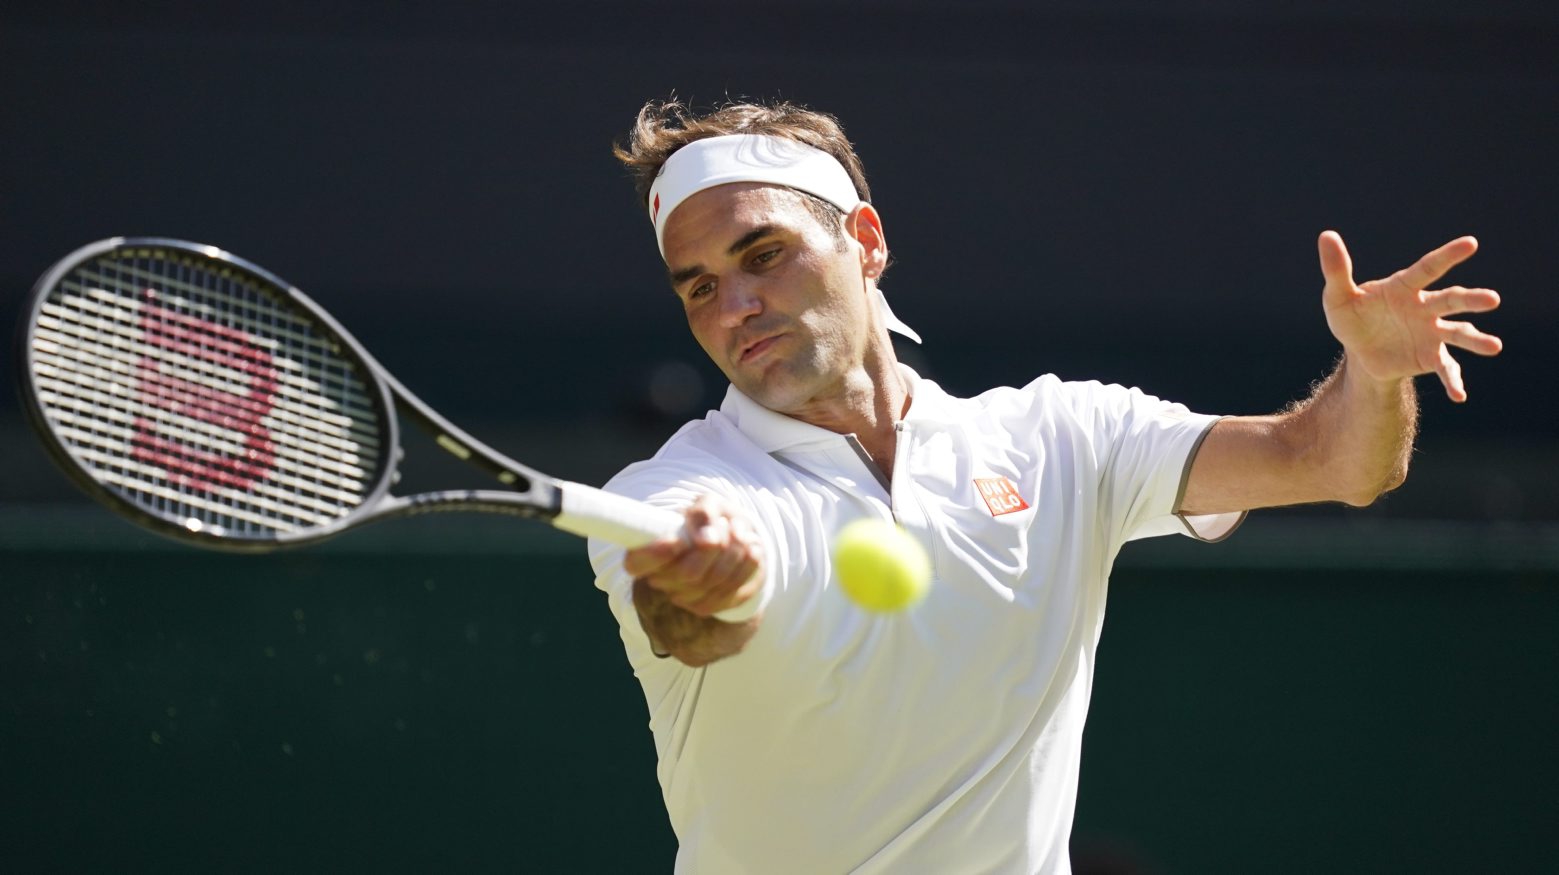 epa07694847 Roger Federer of Switzerland returns to Jay Clarke of Britain in their second round match during the Wimbledon Championships at the All England Lawn Tennis Club, in London, Britain, 04 July 2019. EPA/WILL OLIVER EDITORIAL USE ONLY/NO COMMERCIAL SALES BRITAIN TENNIS WIMBLEDON 2019 GRAND SLAM